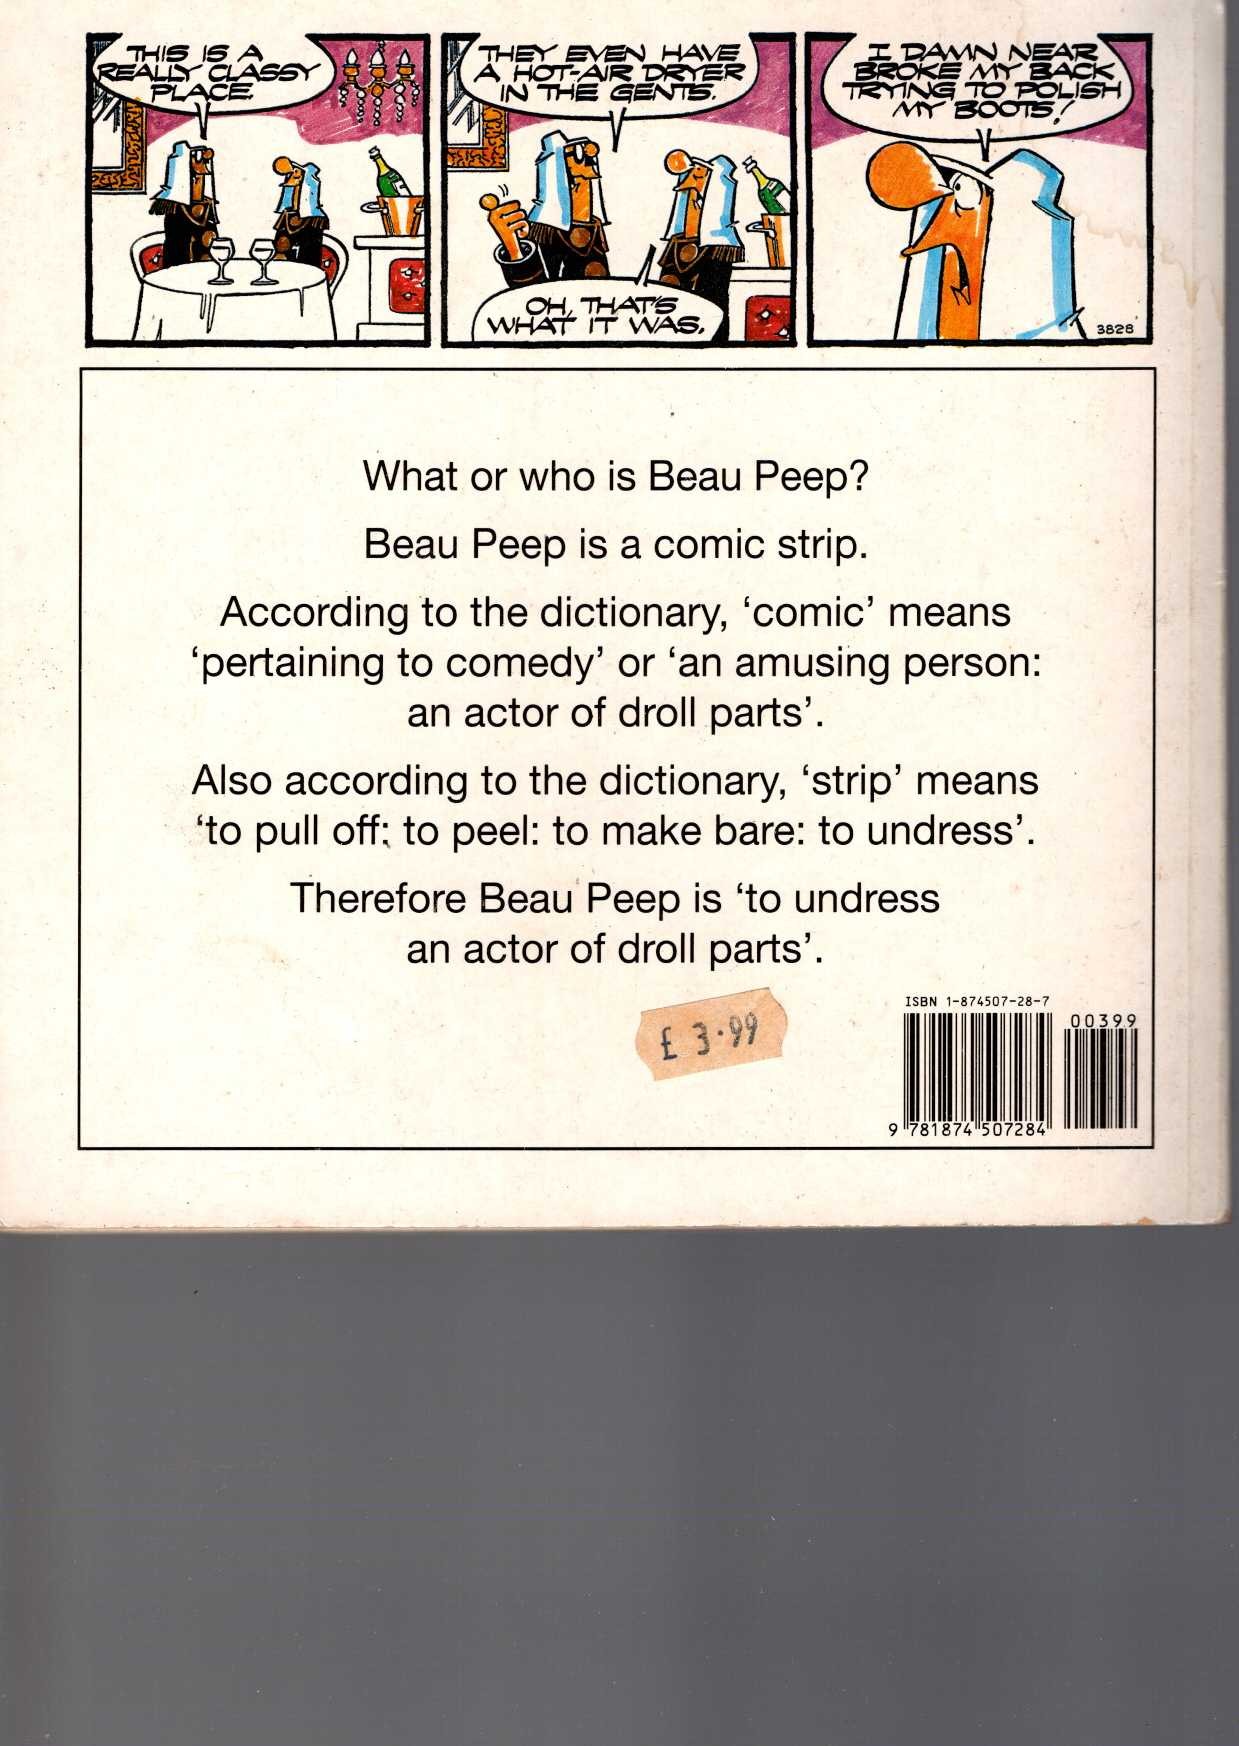 BEAU PEEP BOOK 15 magnified rear book cover image